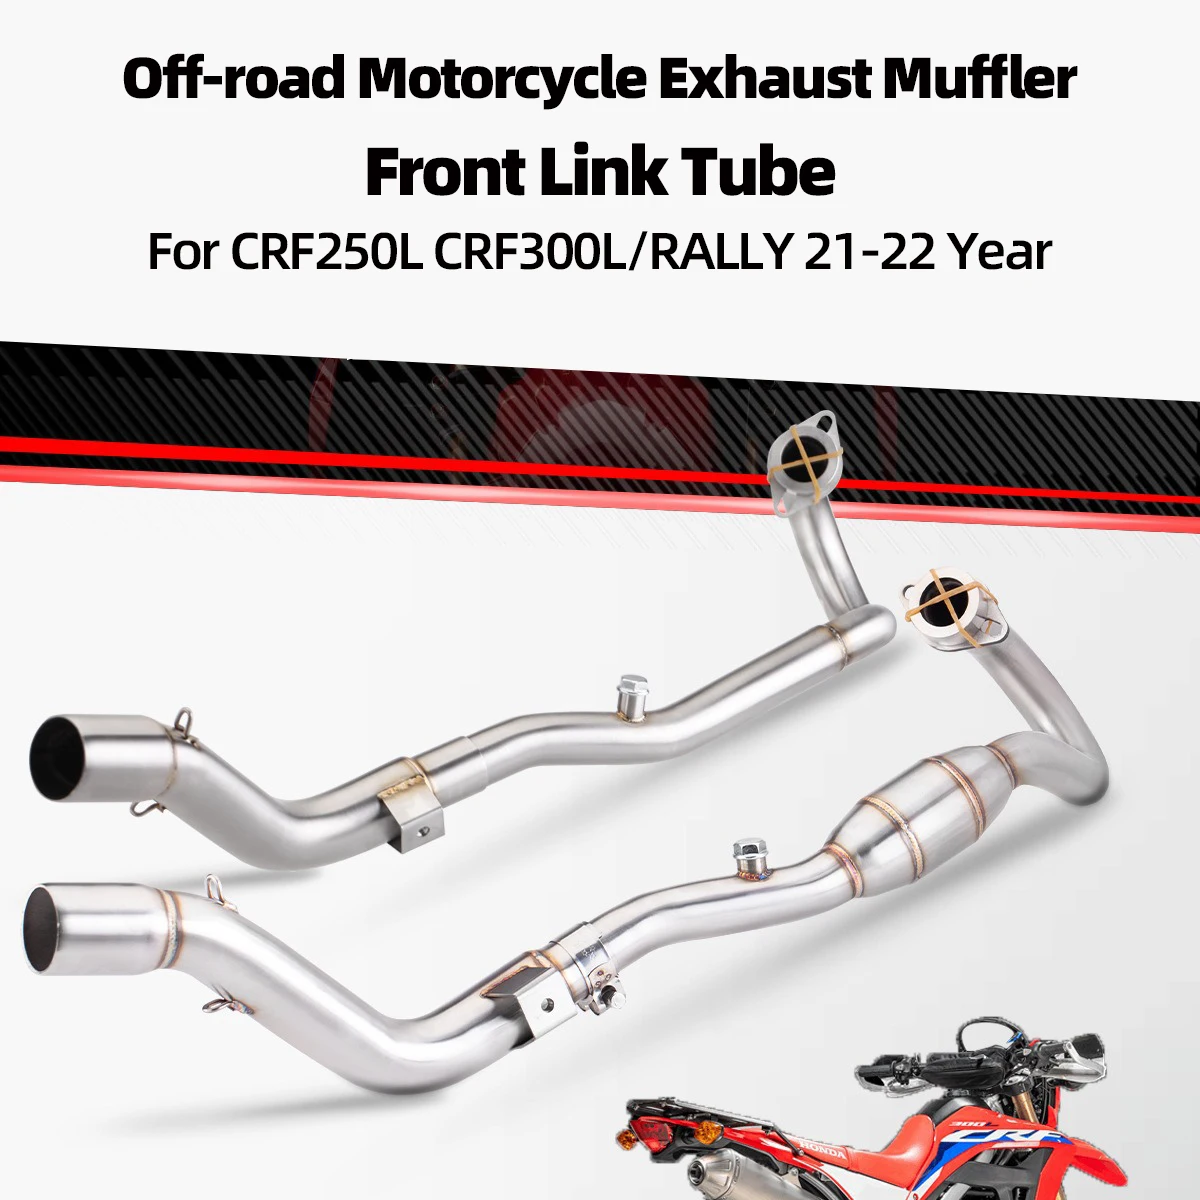 

Off-Road Motorcycle Exhaust Muffler Front Middle Link Tube For Honda CRF250L CRF300L/RALLY Dirt Bike Exhaust System Modify Parts